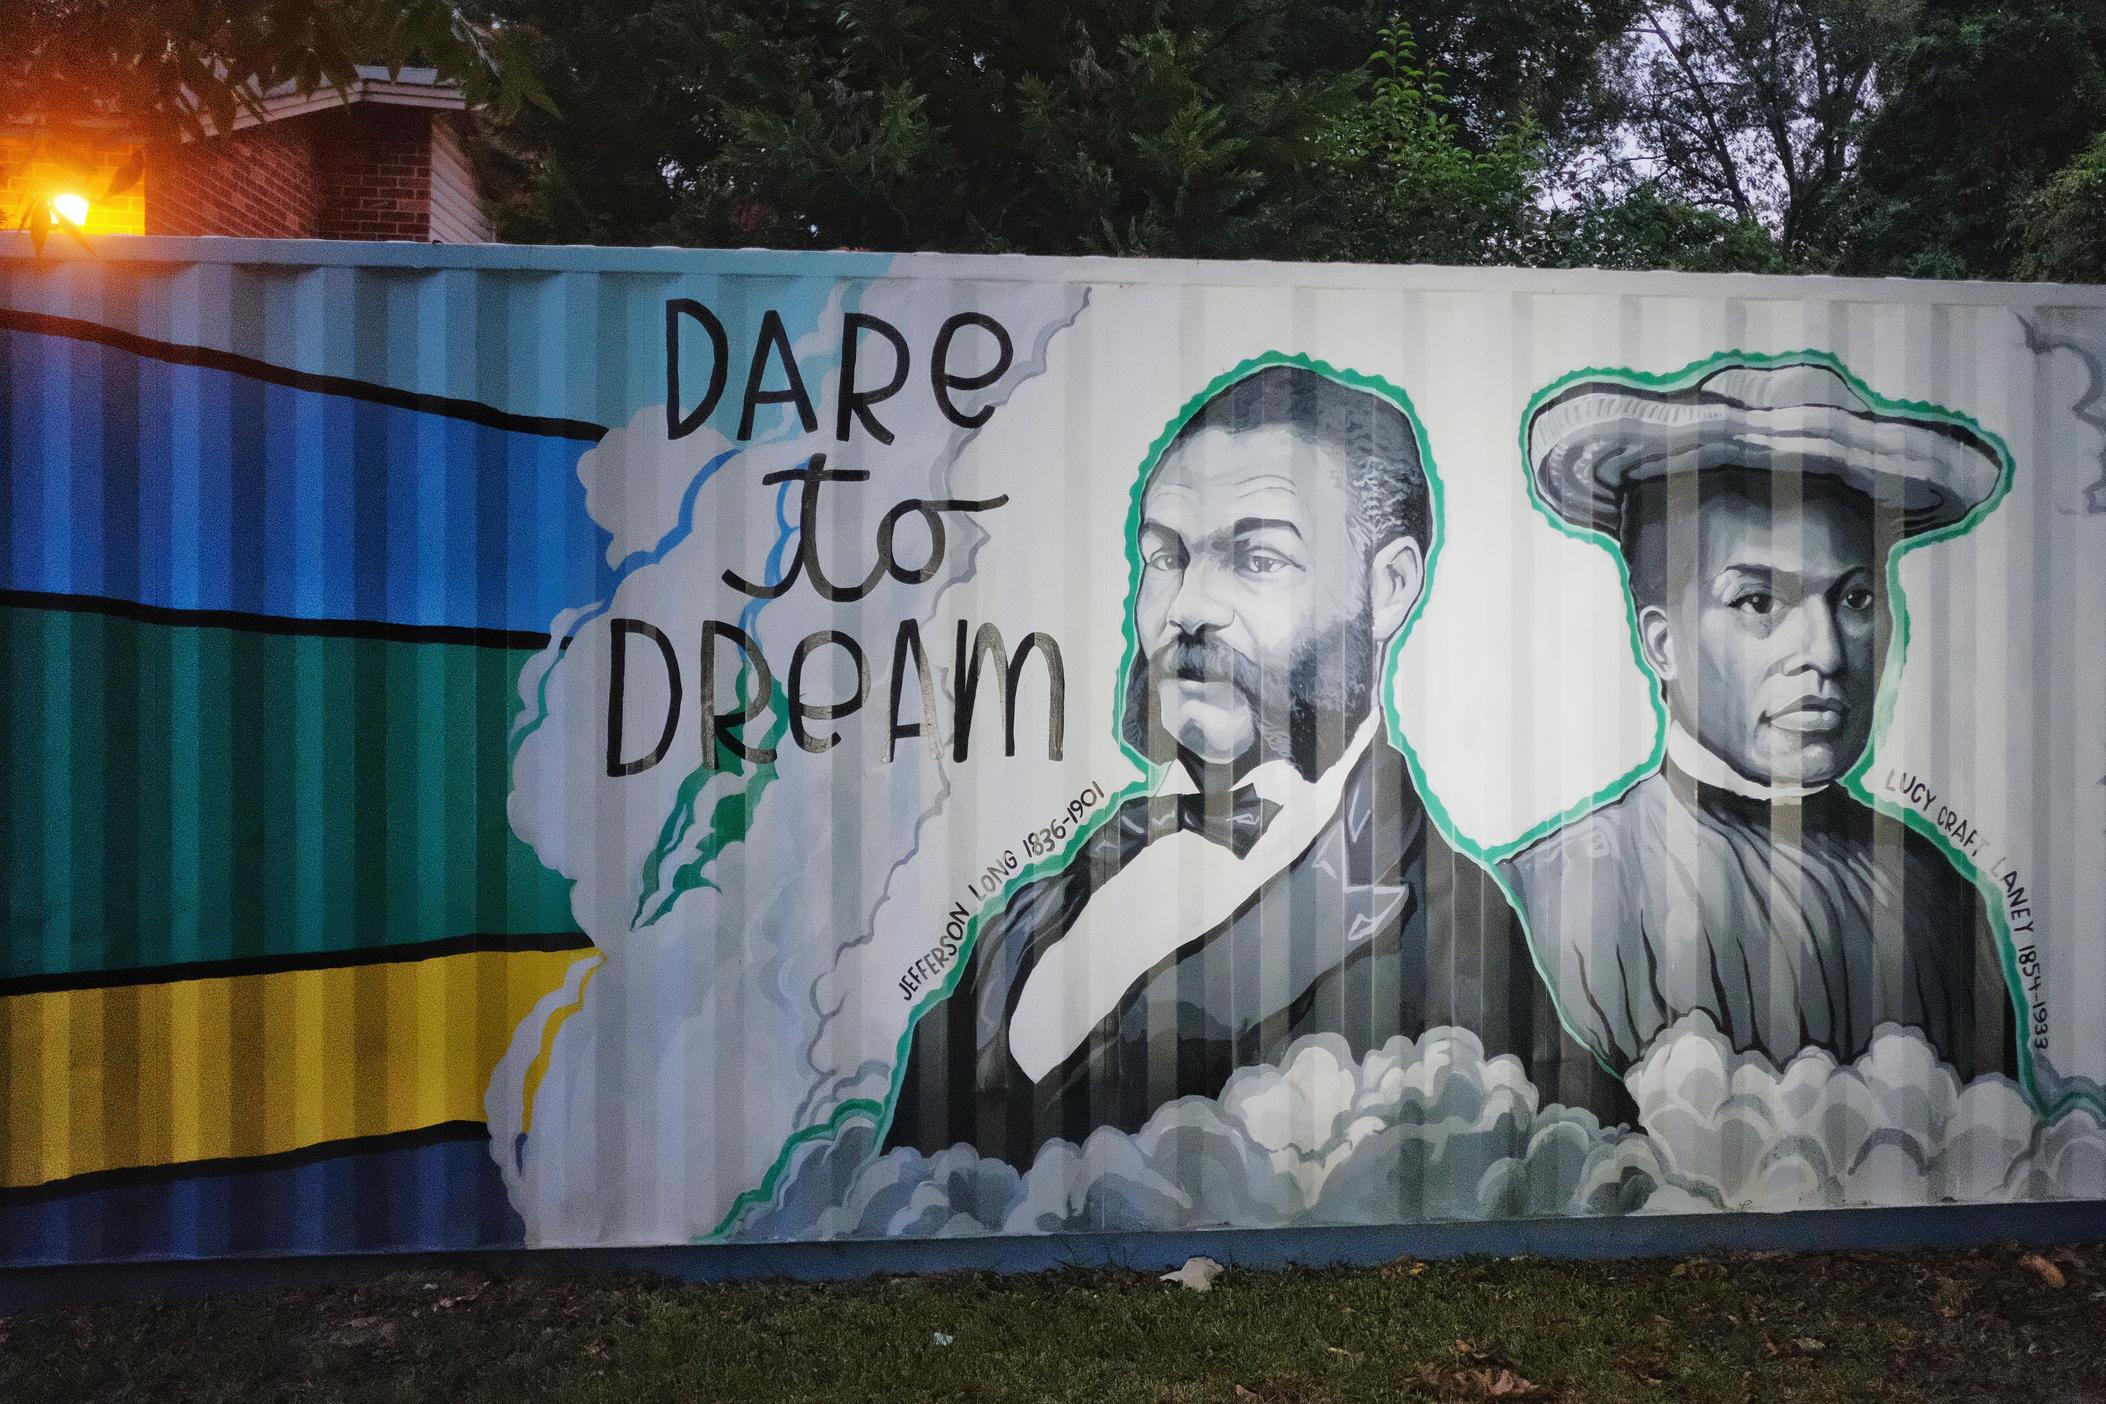 U.S. Rep. Jefferson Long (left), the first Black congressman of Georgia, and pioneering educator of Black children Lucy Craft Laney (right) are depicted in a mural by artist Kevin Lewis in Macon's Pleasant Hill neighborhood which both at one time called home.